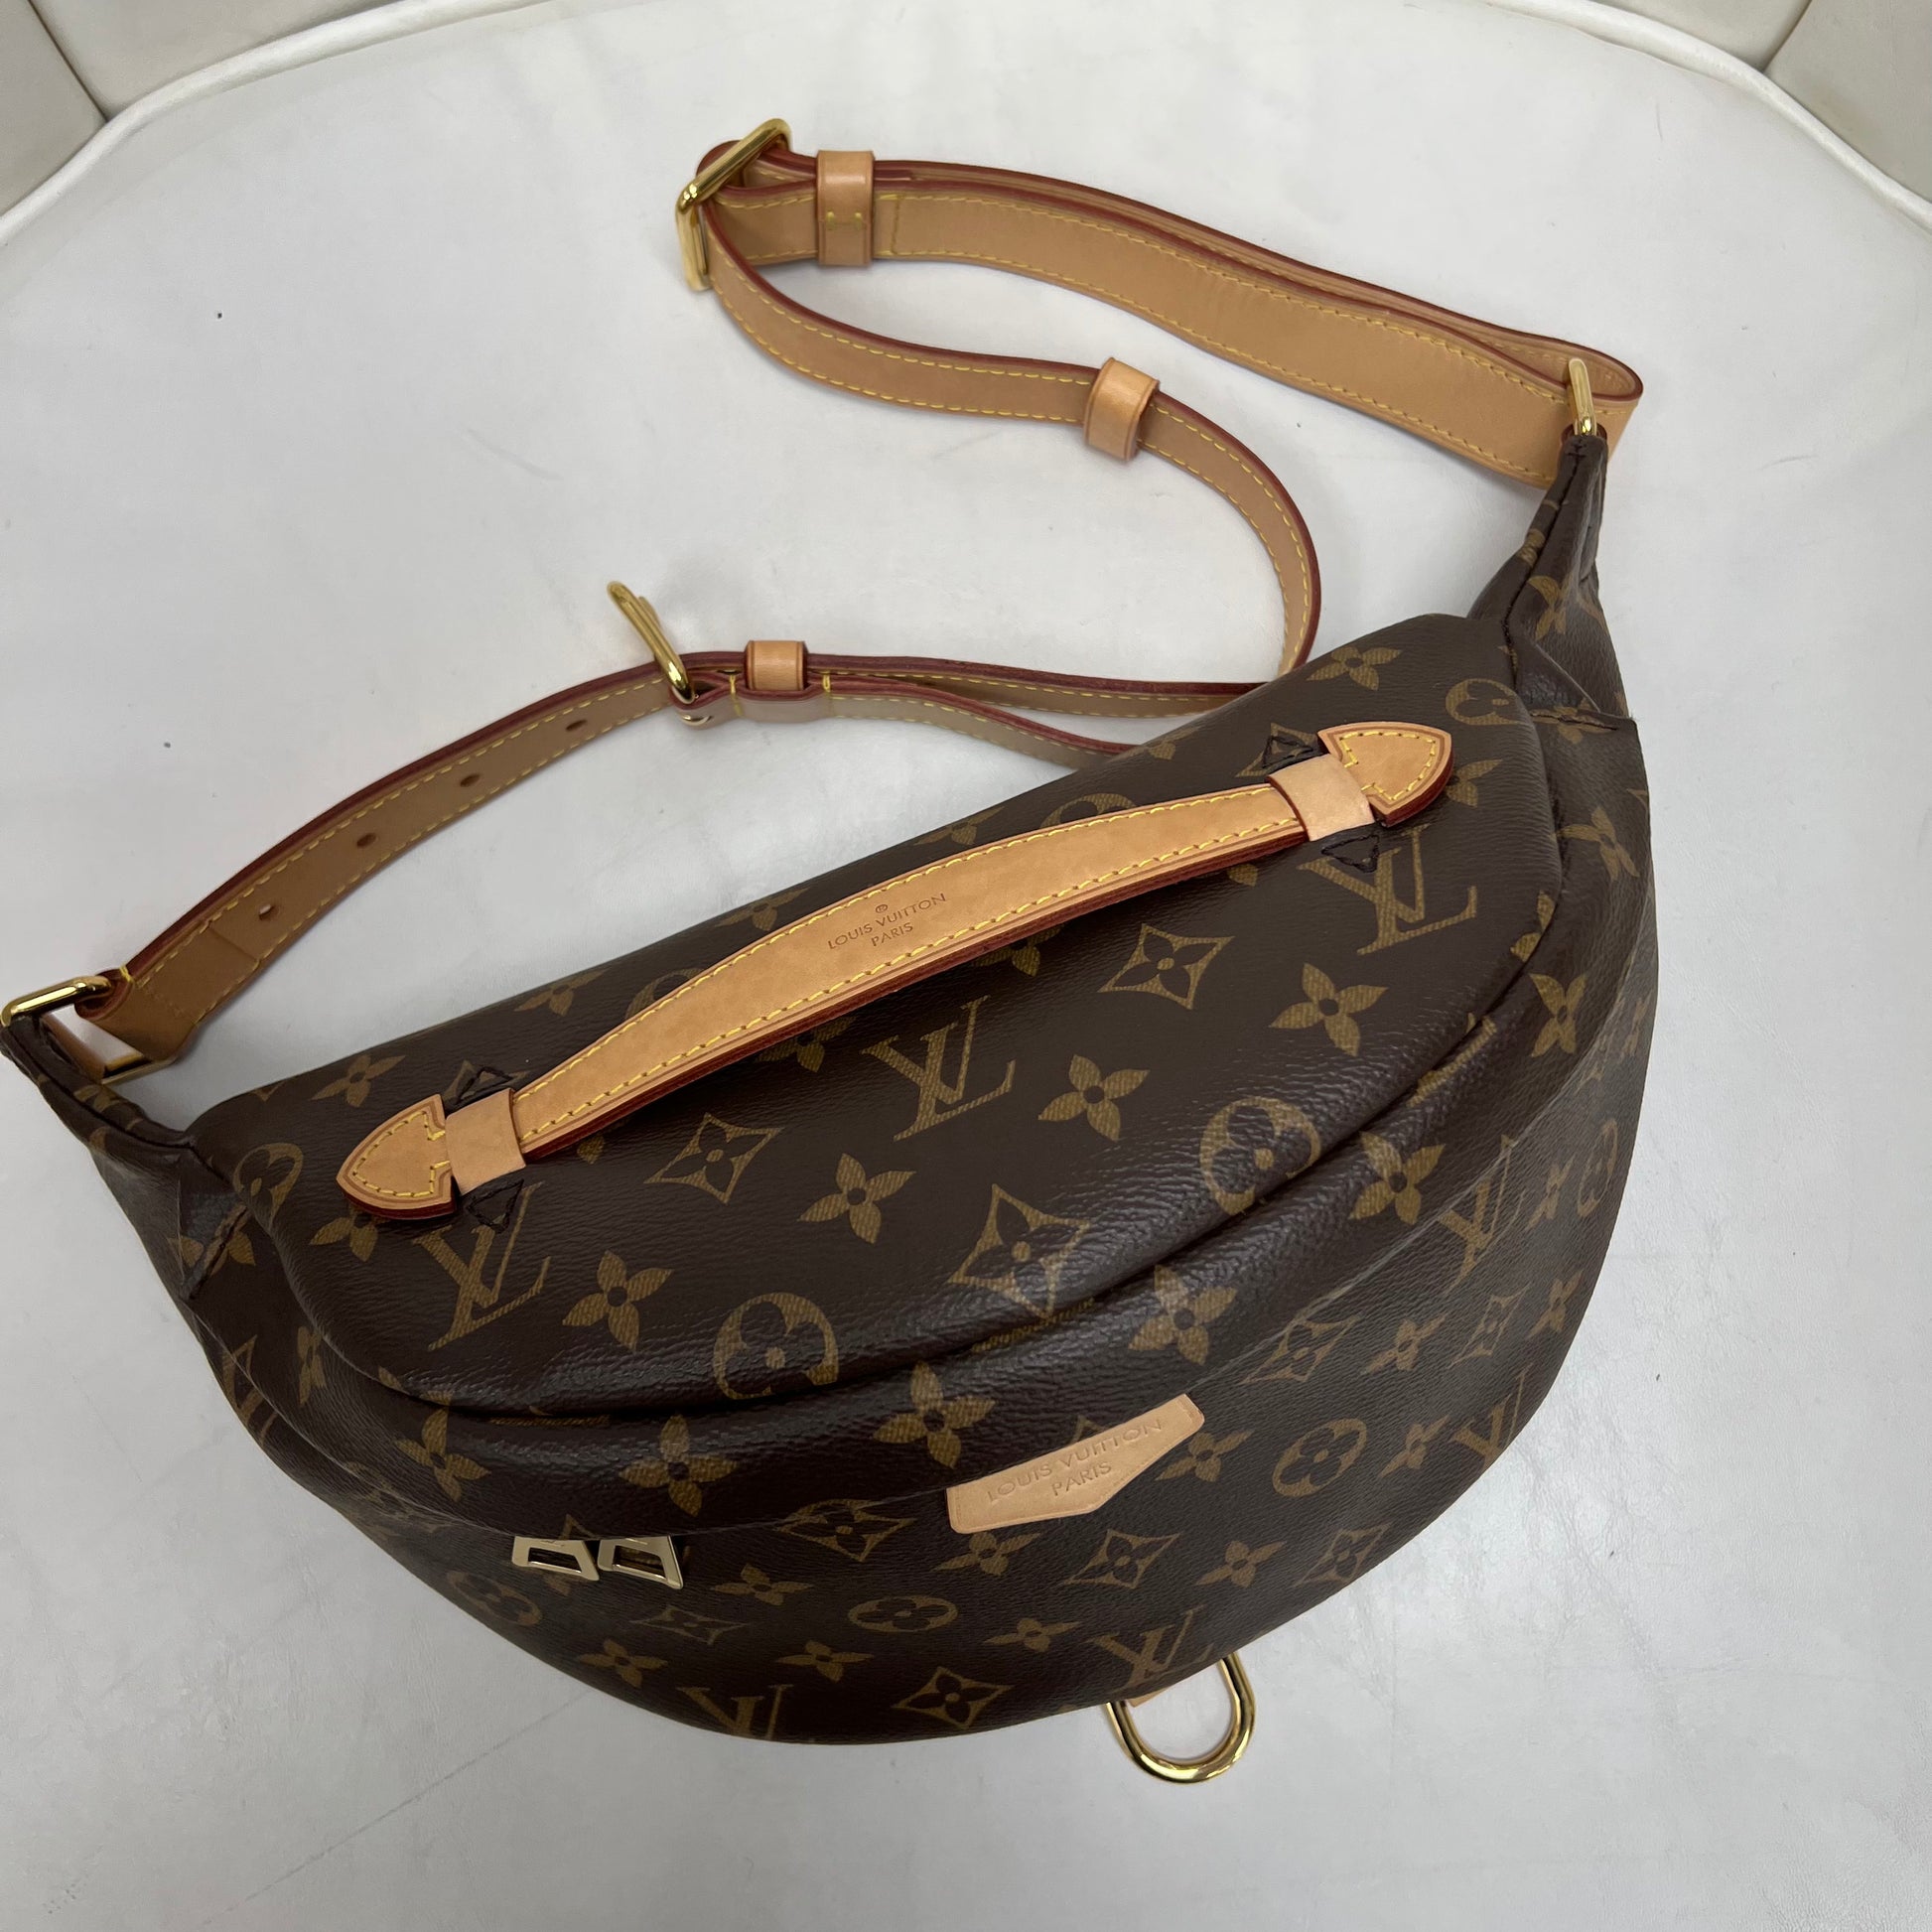 WOW!!! THE SIZE IS UNBELIEVABLE  LV MINI BUMBAG MONOGRAM 